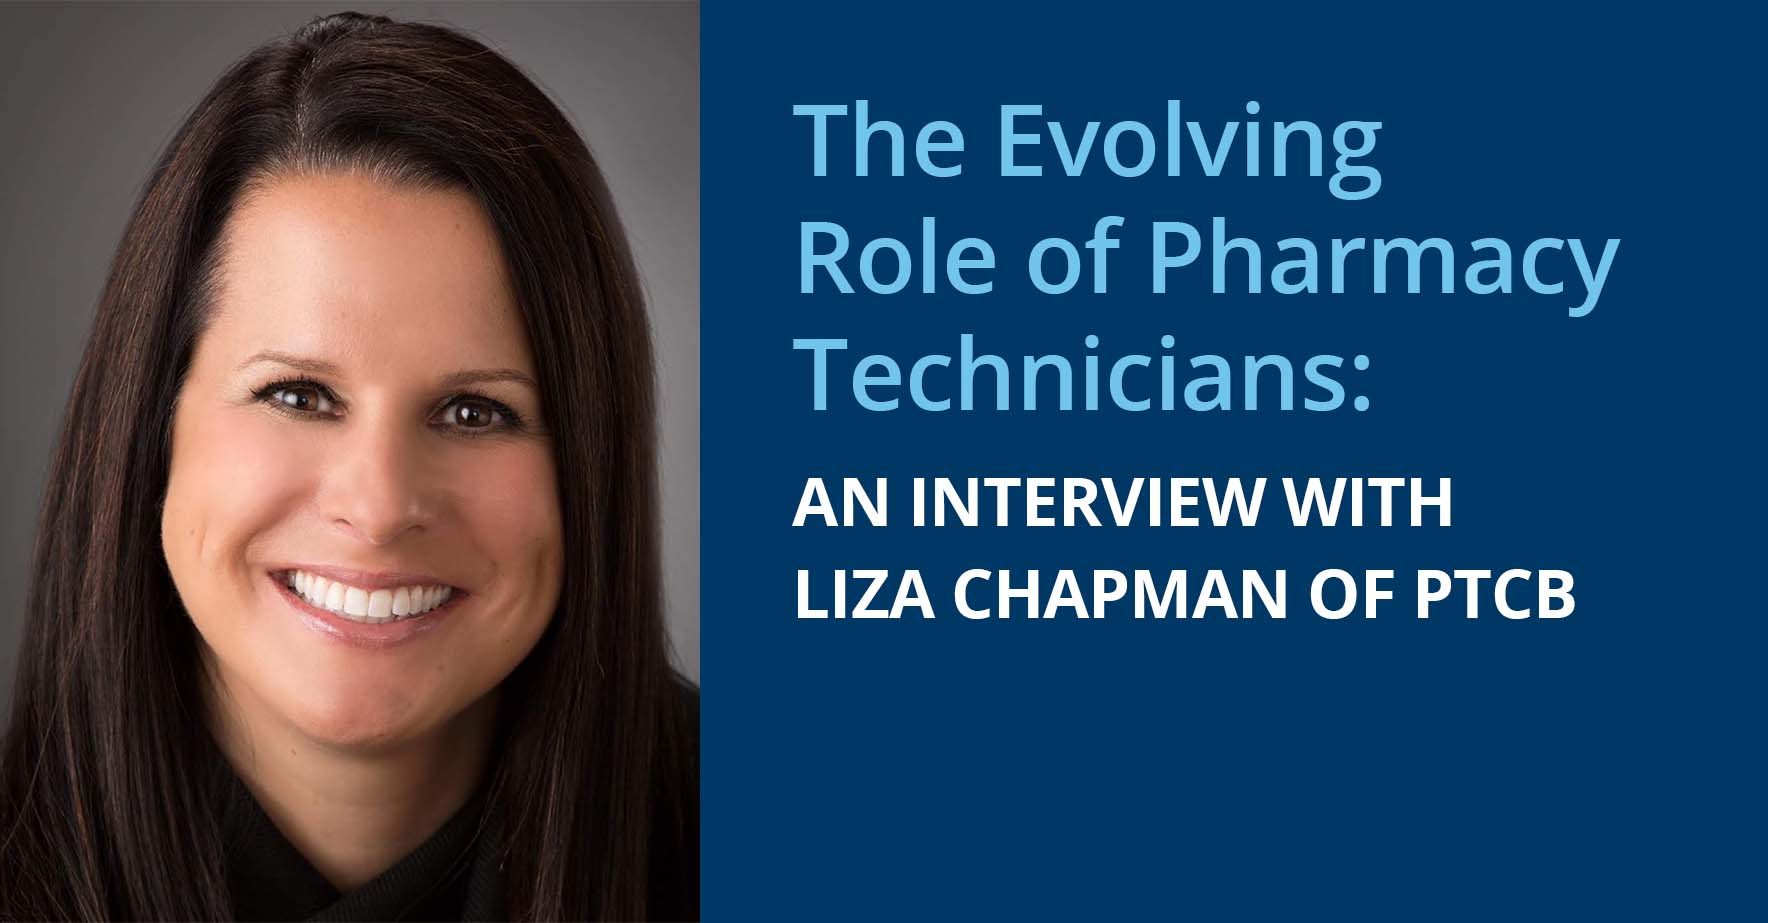 The_Evolving_Role_of_Pharmacy_Technicians_An_Interview_With_Liza_Chapman_of_PTCB.jpg